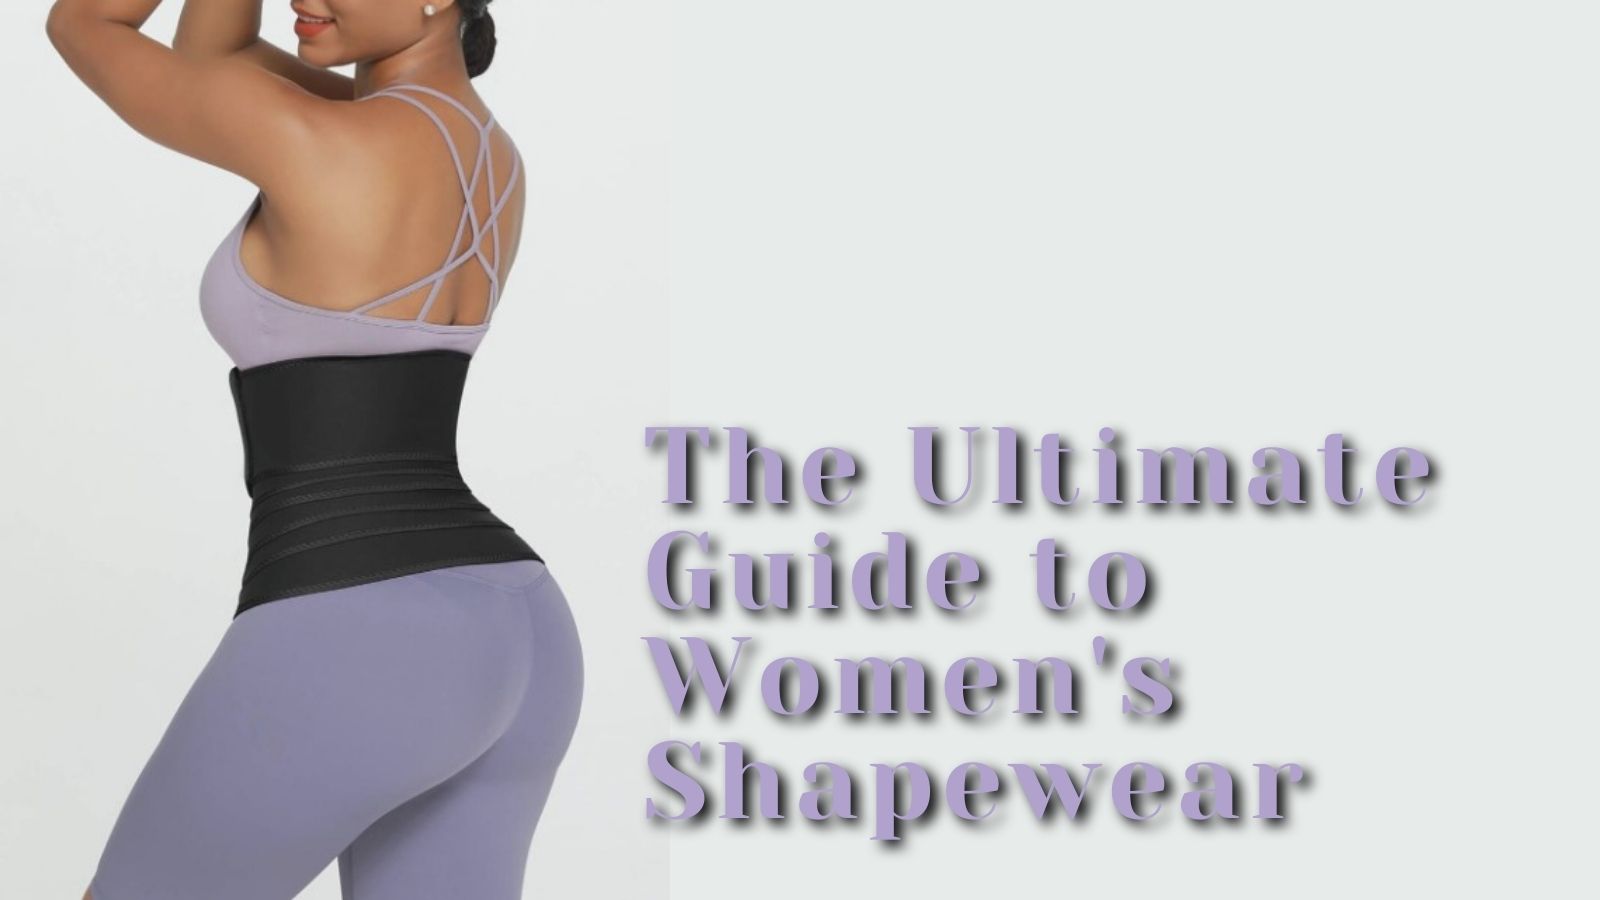 The Ultimate Guide to Women's Shapewear